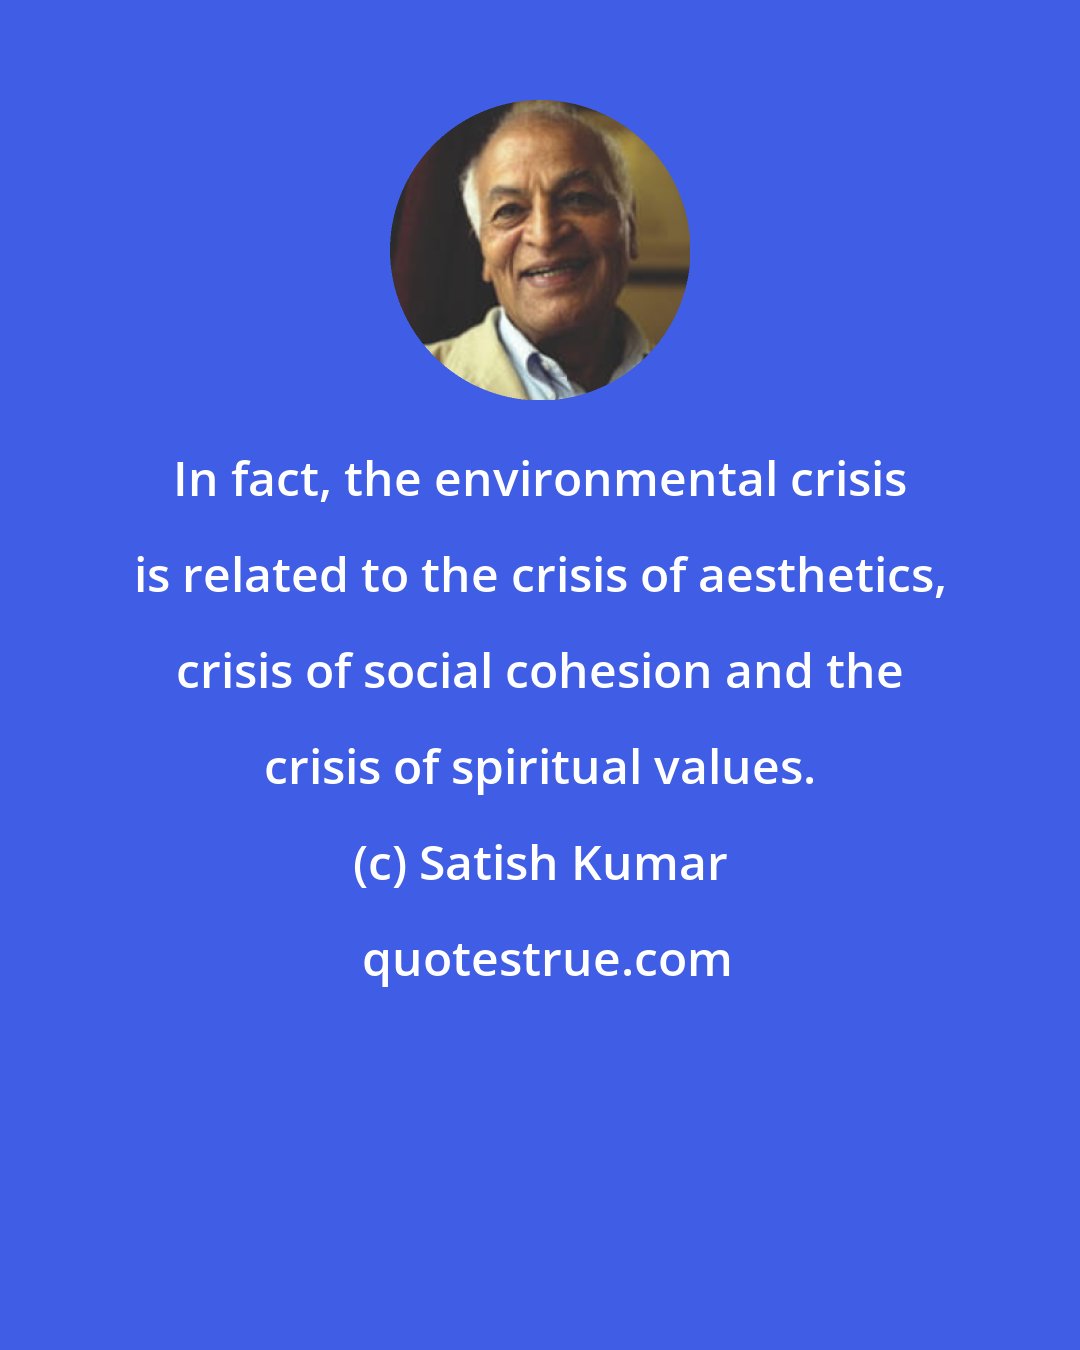 Satish Kumar: In fact, the environmental crisis is related to the crisis of aesthetics, crisis of social cohesion and the crisis of spiritual values.